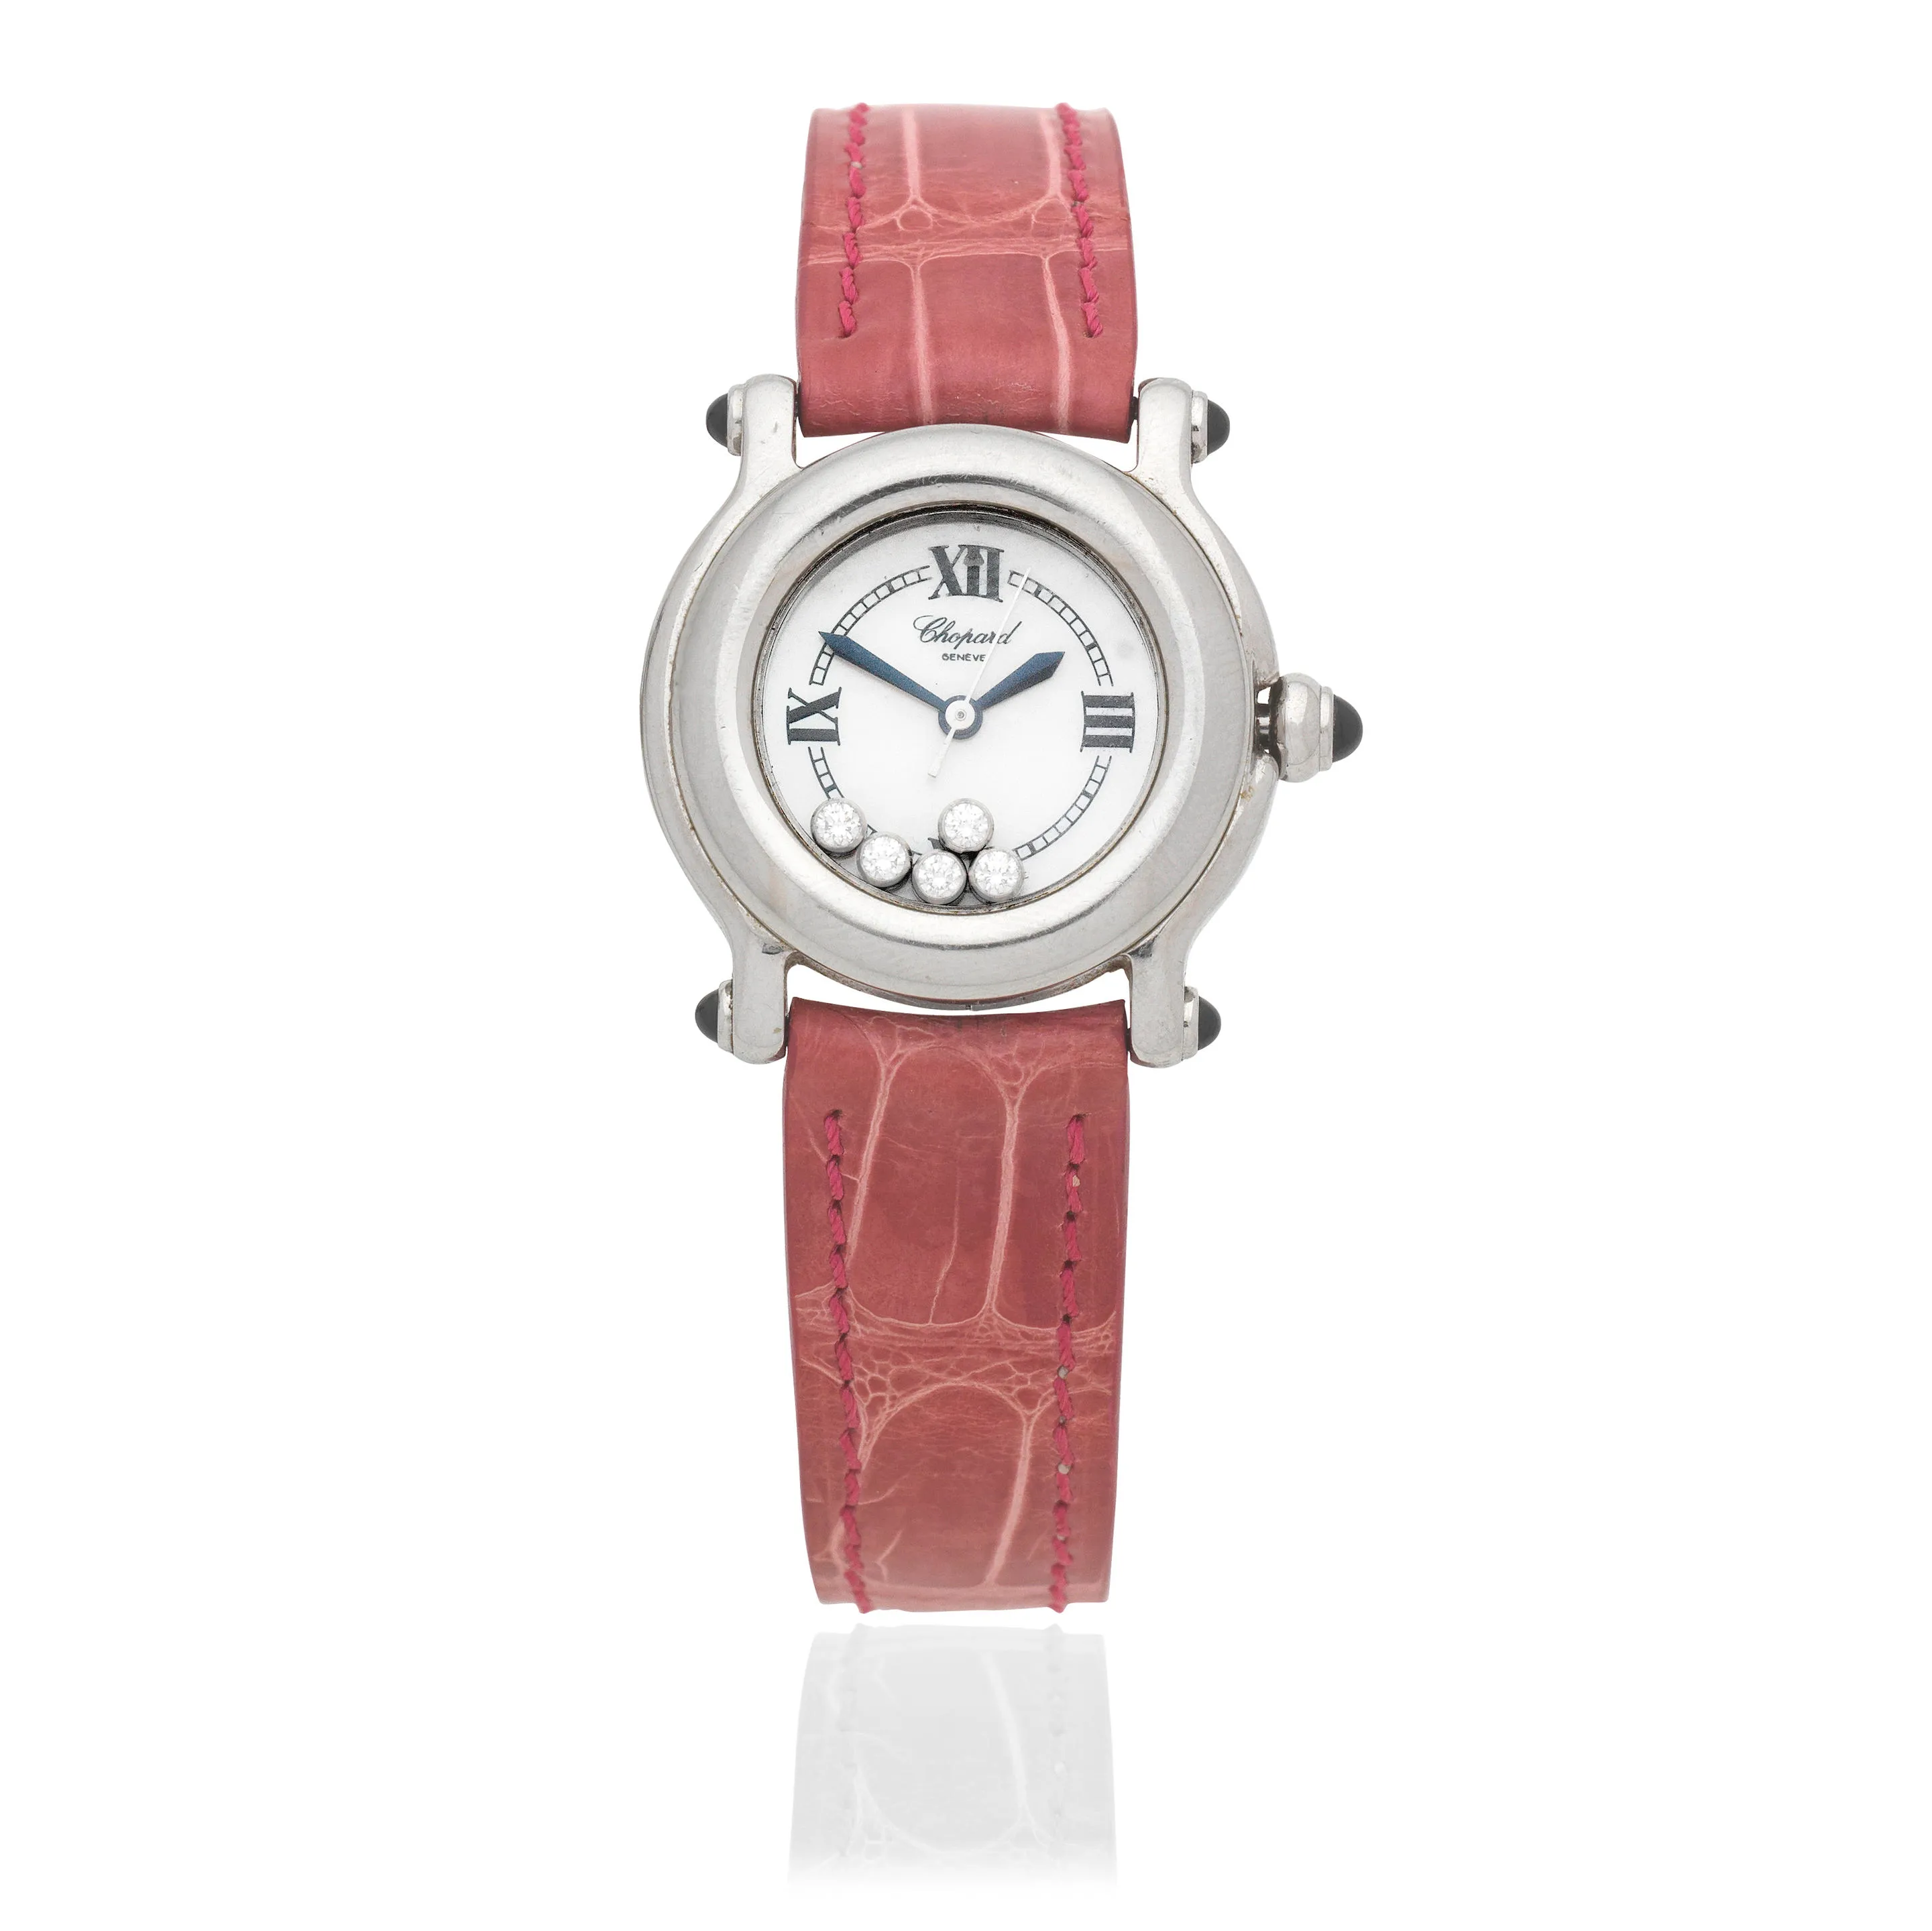 Chopard 8245 26mm Stainless steel Mother-of-pearl